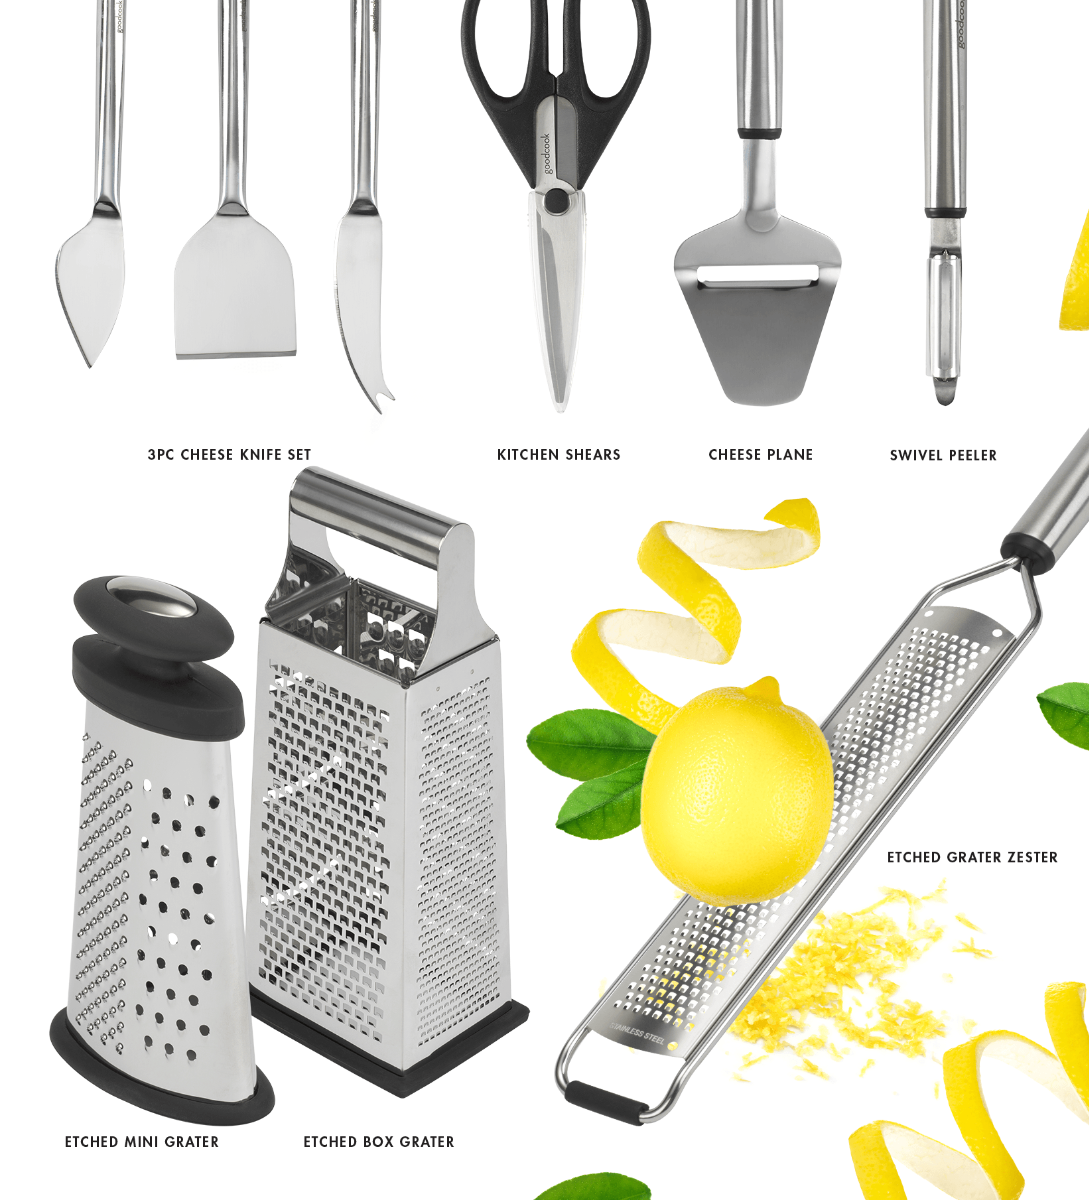 https://www.goodcook.com/media/wysiwyg/GoodCook-cut-and-grate.png?auto=webp&format=png&quality=85